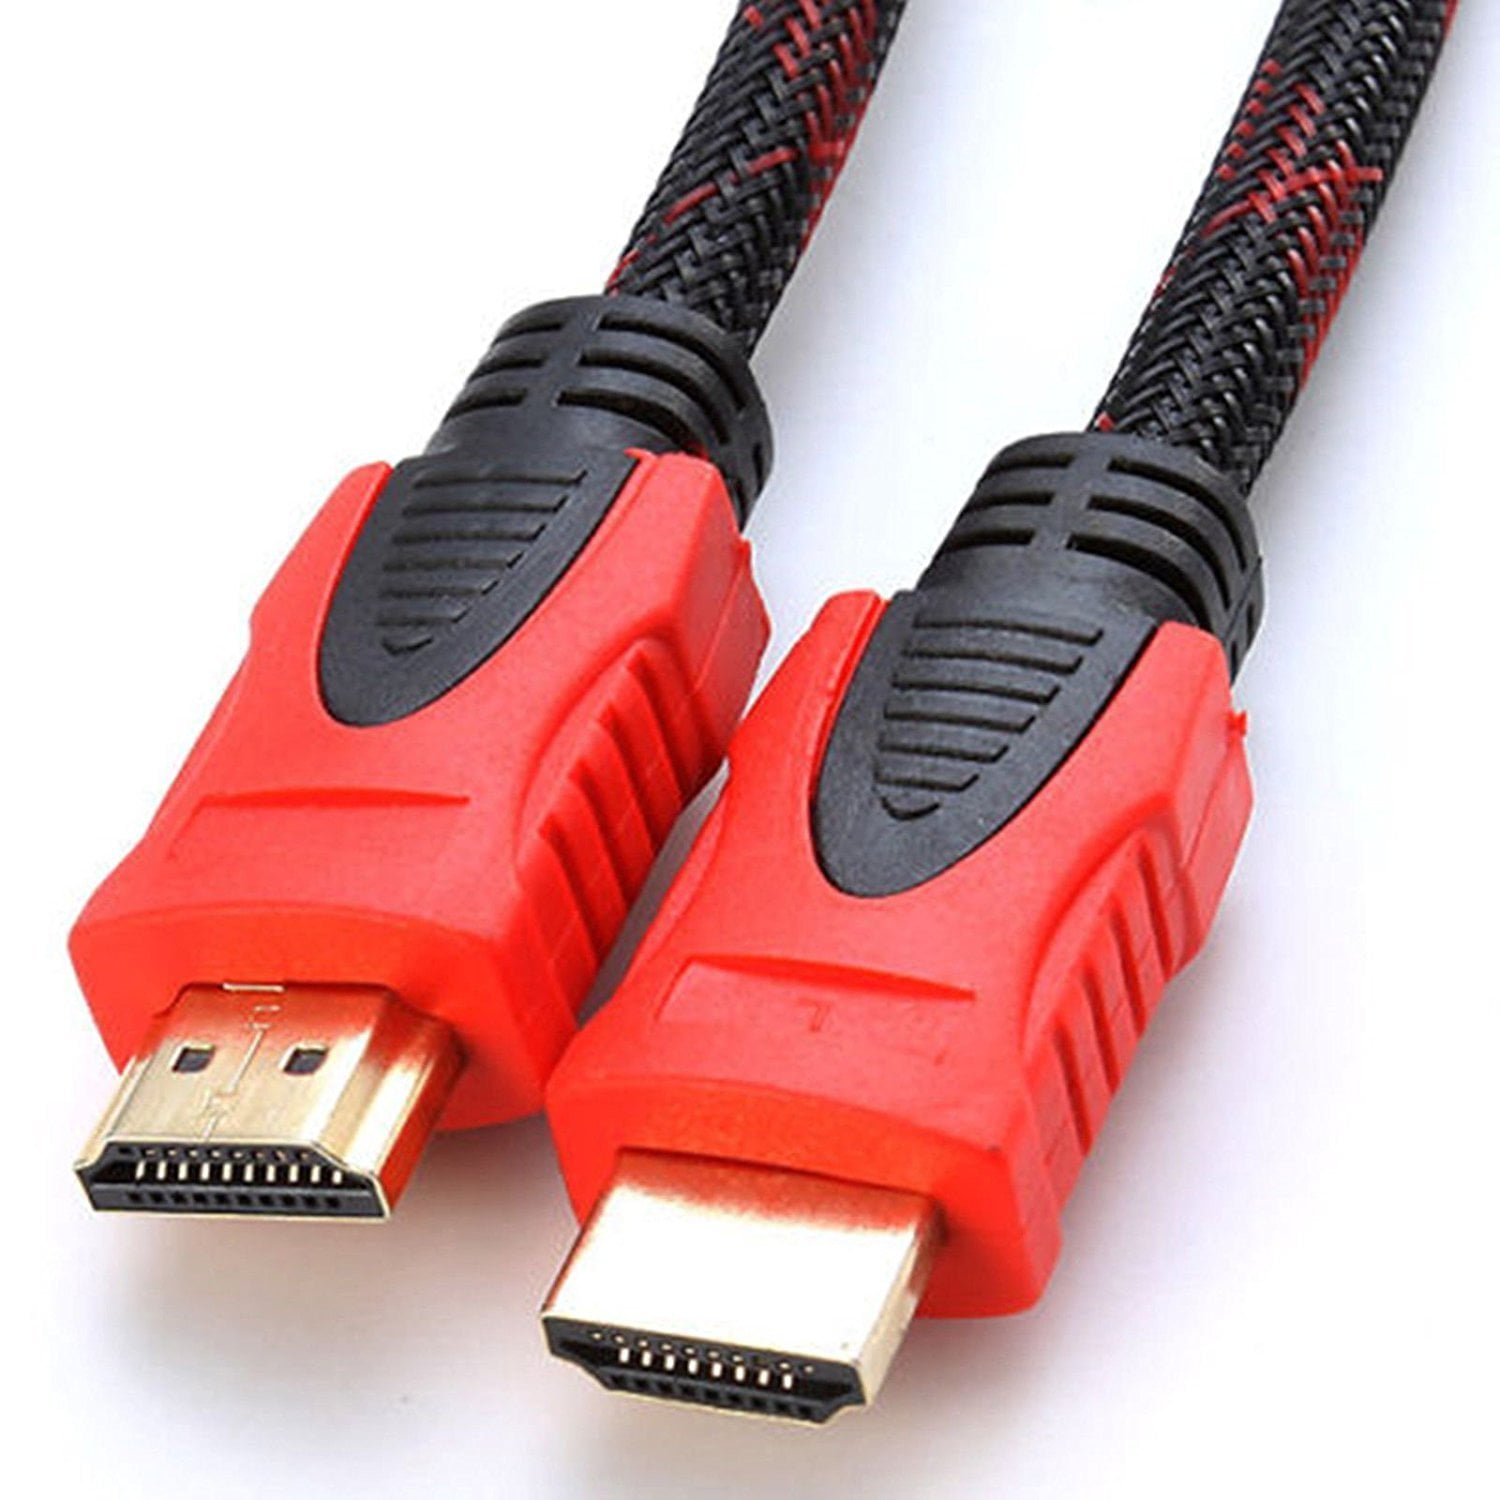 10FT 15FT HDMI Cable Pack Super High Speed HDMI 1.4 Cable 1080P 3D HDTV PS4 